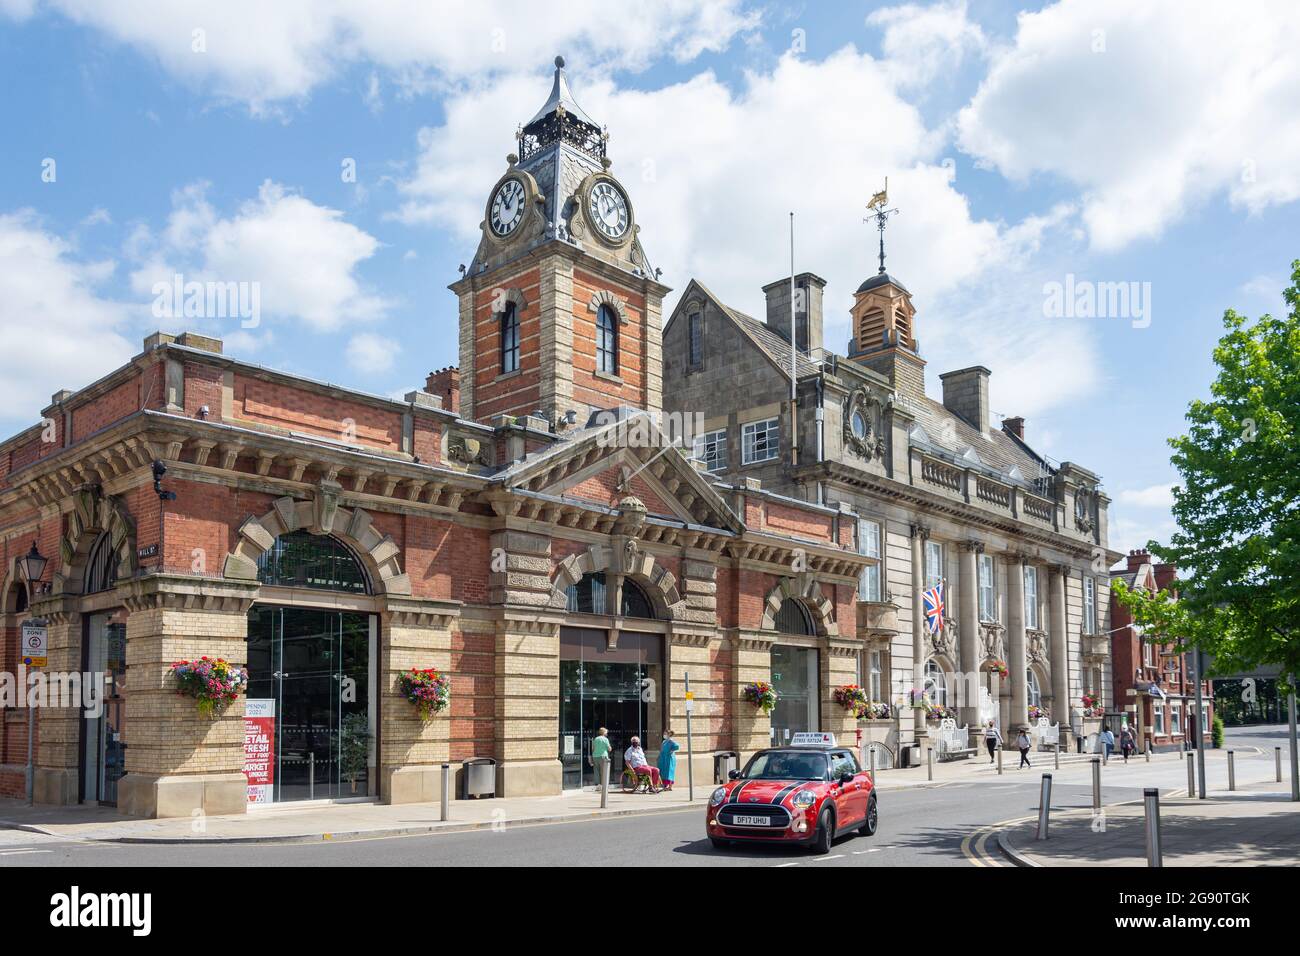 Old Market Hall and Municipal Buildings, Memorial Square, Crewe, Cheshire, England, United Kingdom Stock Photo